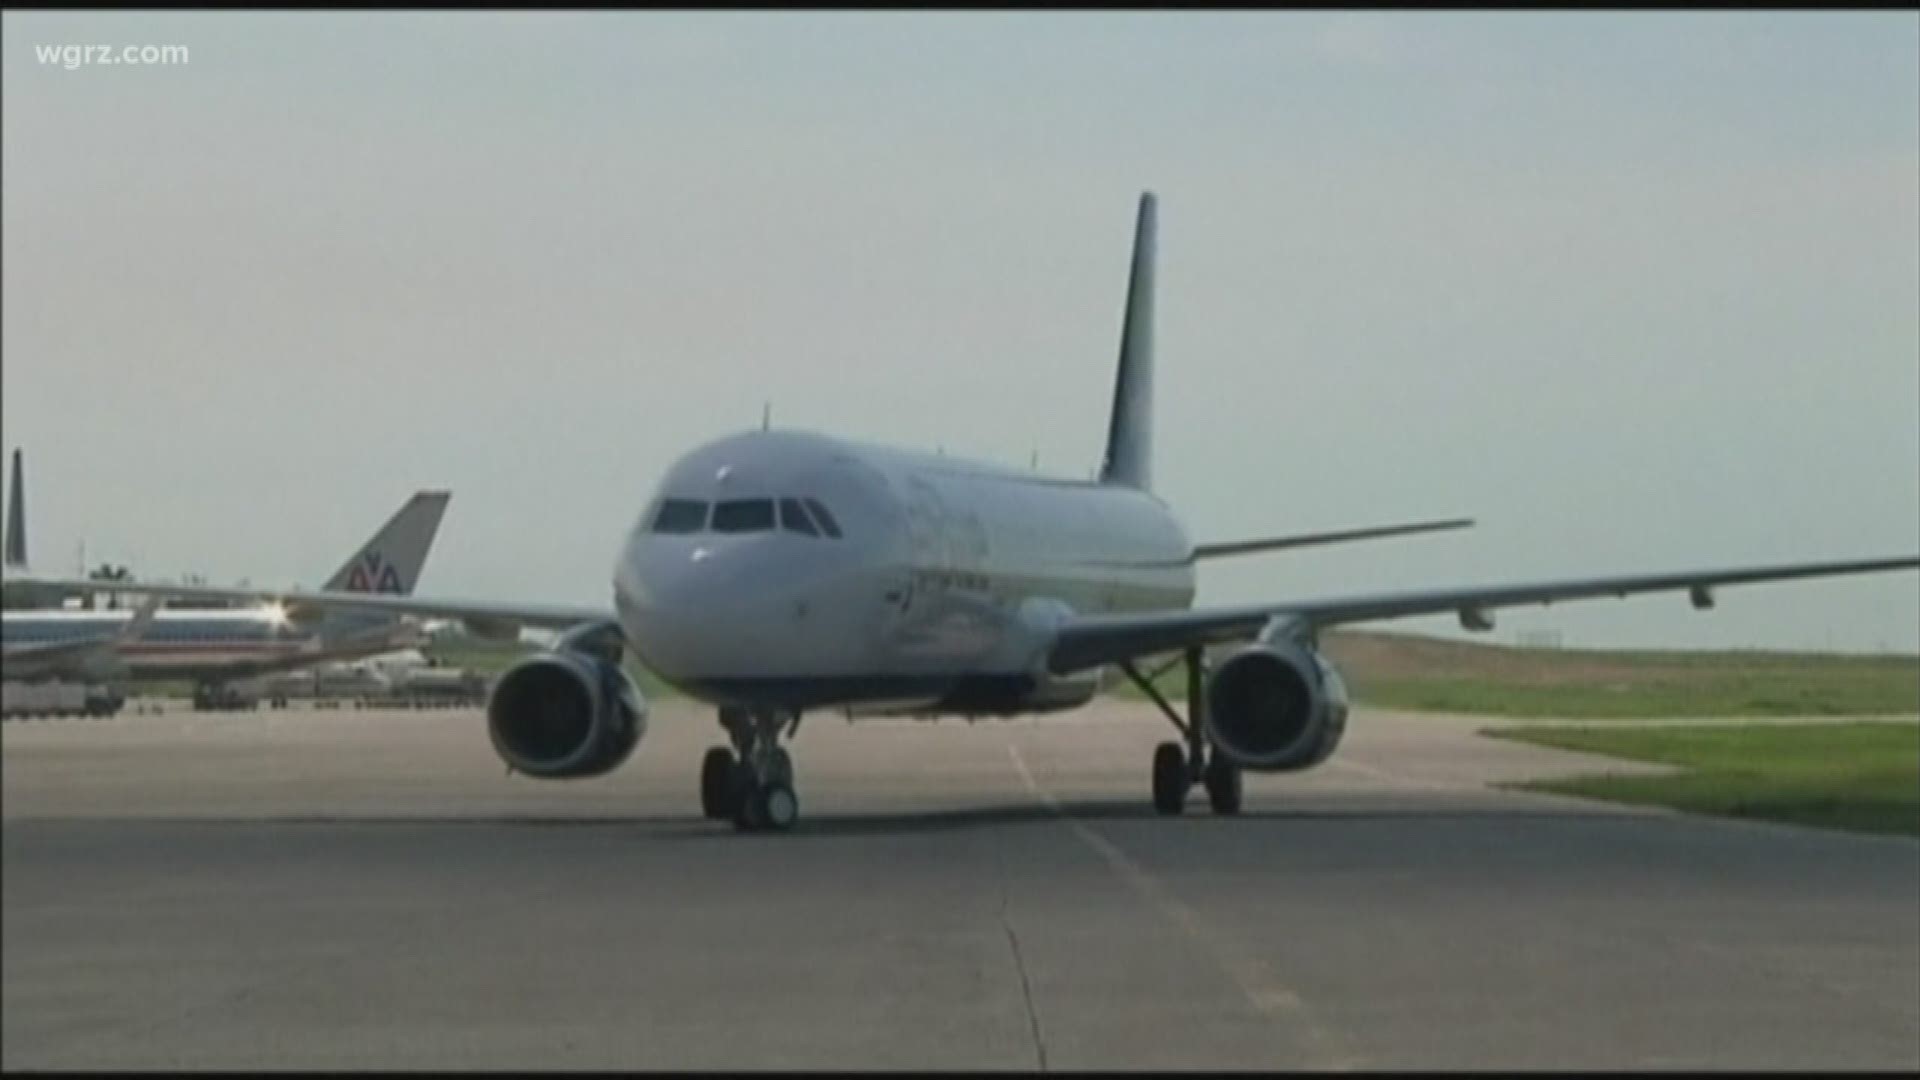 Senator Schumer Pushes For Family Seating On Airlines